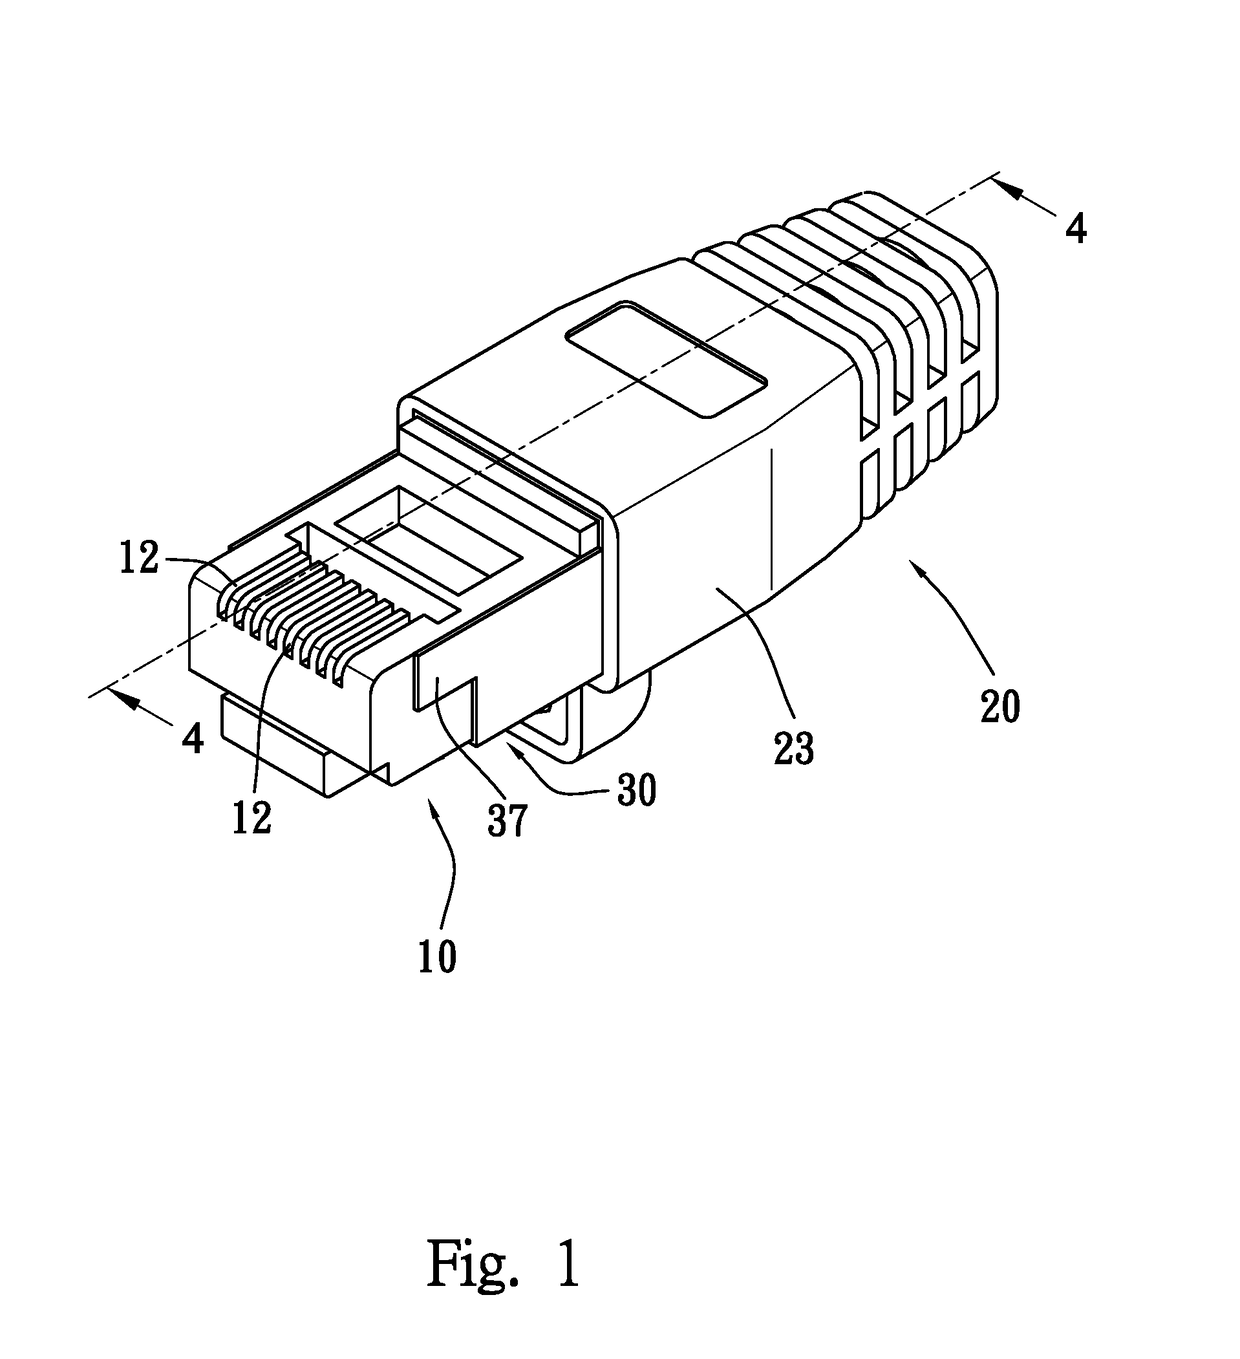 Electrical connector device